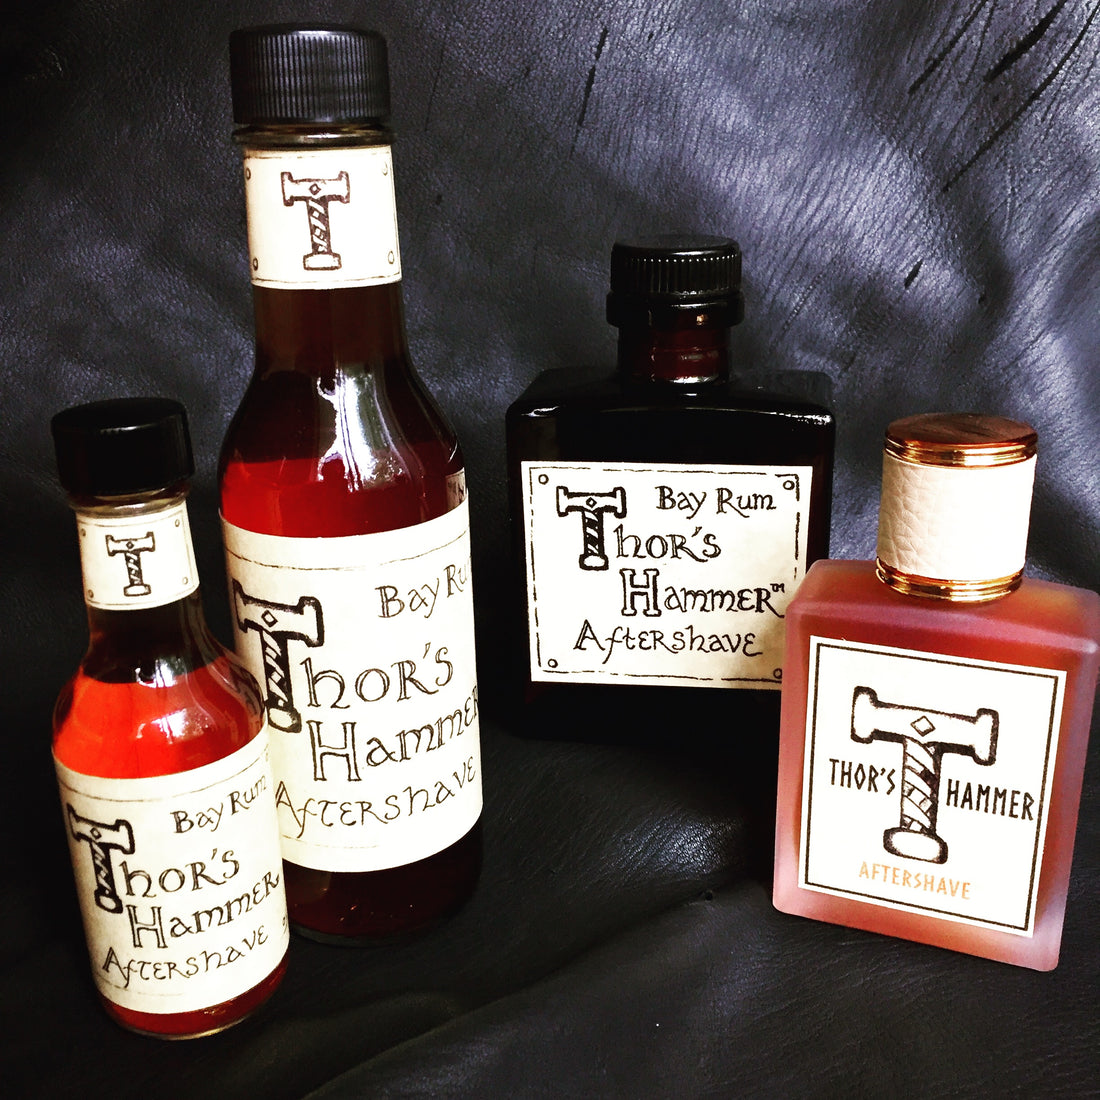 My Dad & Bay Rum: From Burt's Bees to Thor's Hammer